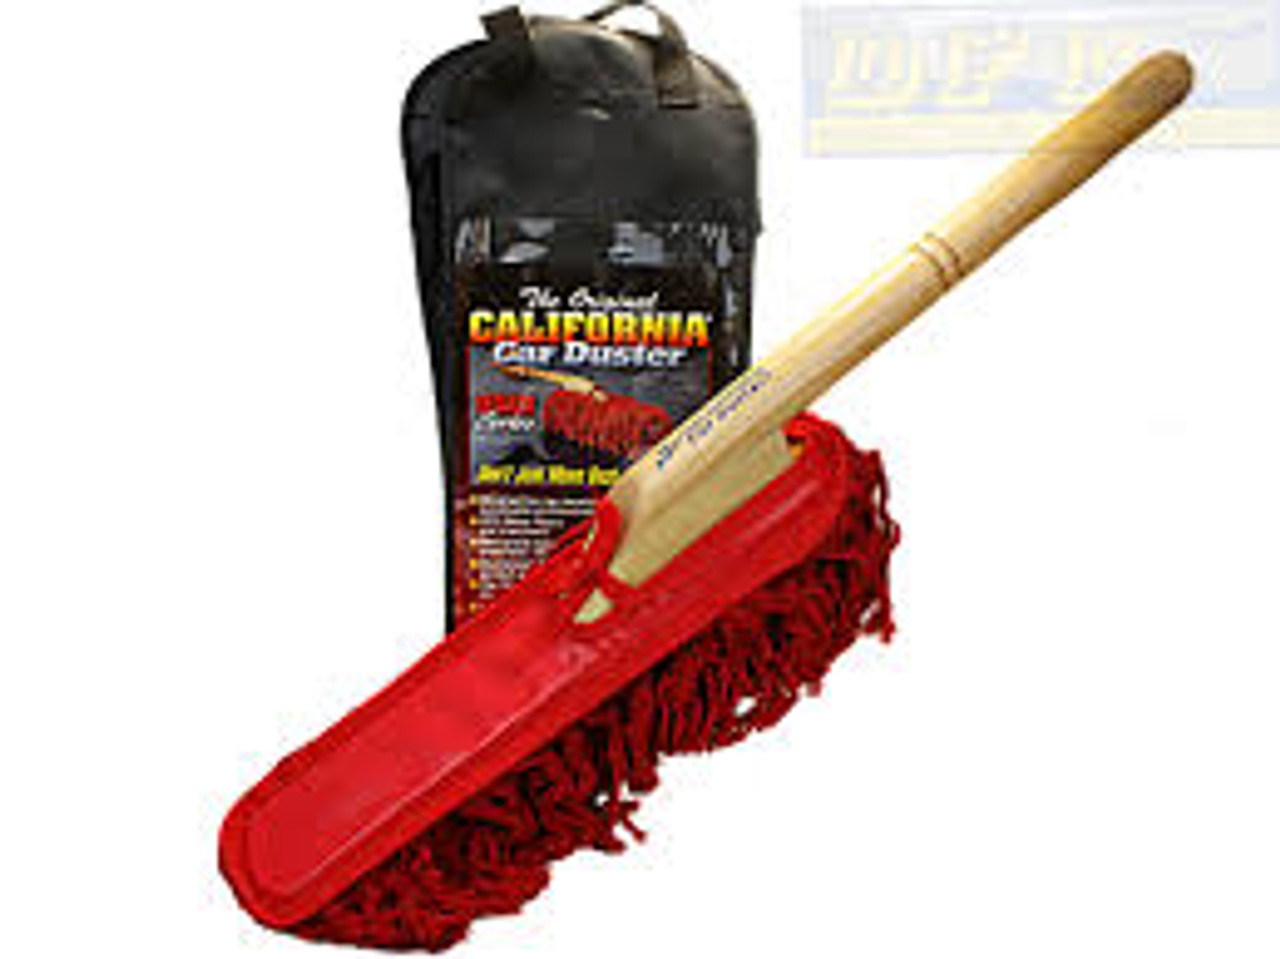 CALIFORNIA CAR DUSTER - ORIGINAL STYLE with WOODEN HANDLE